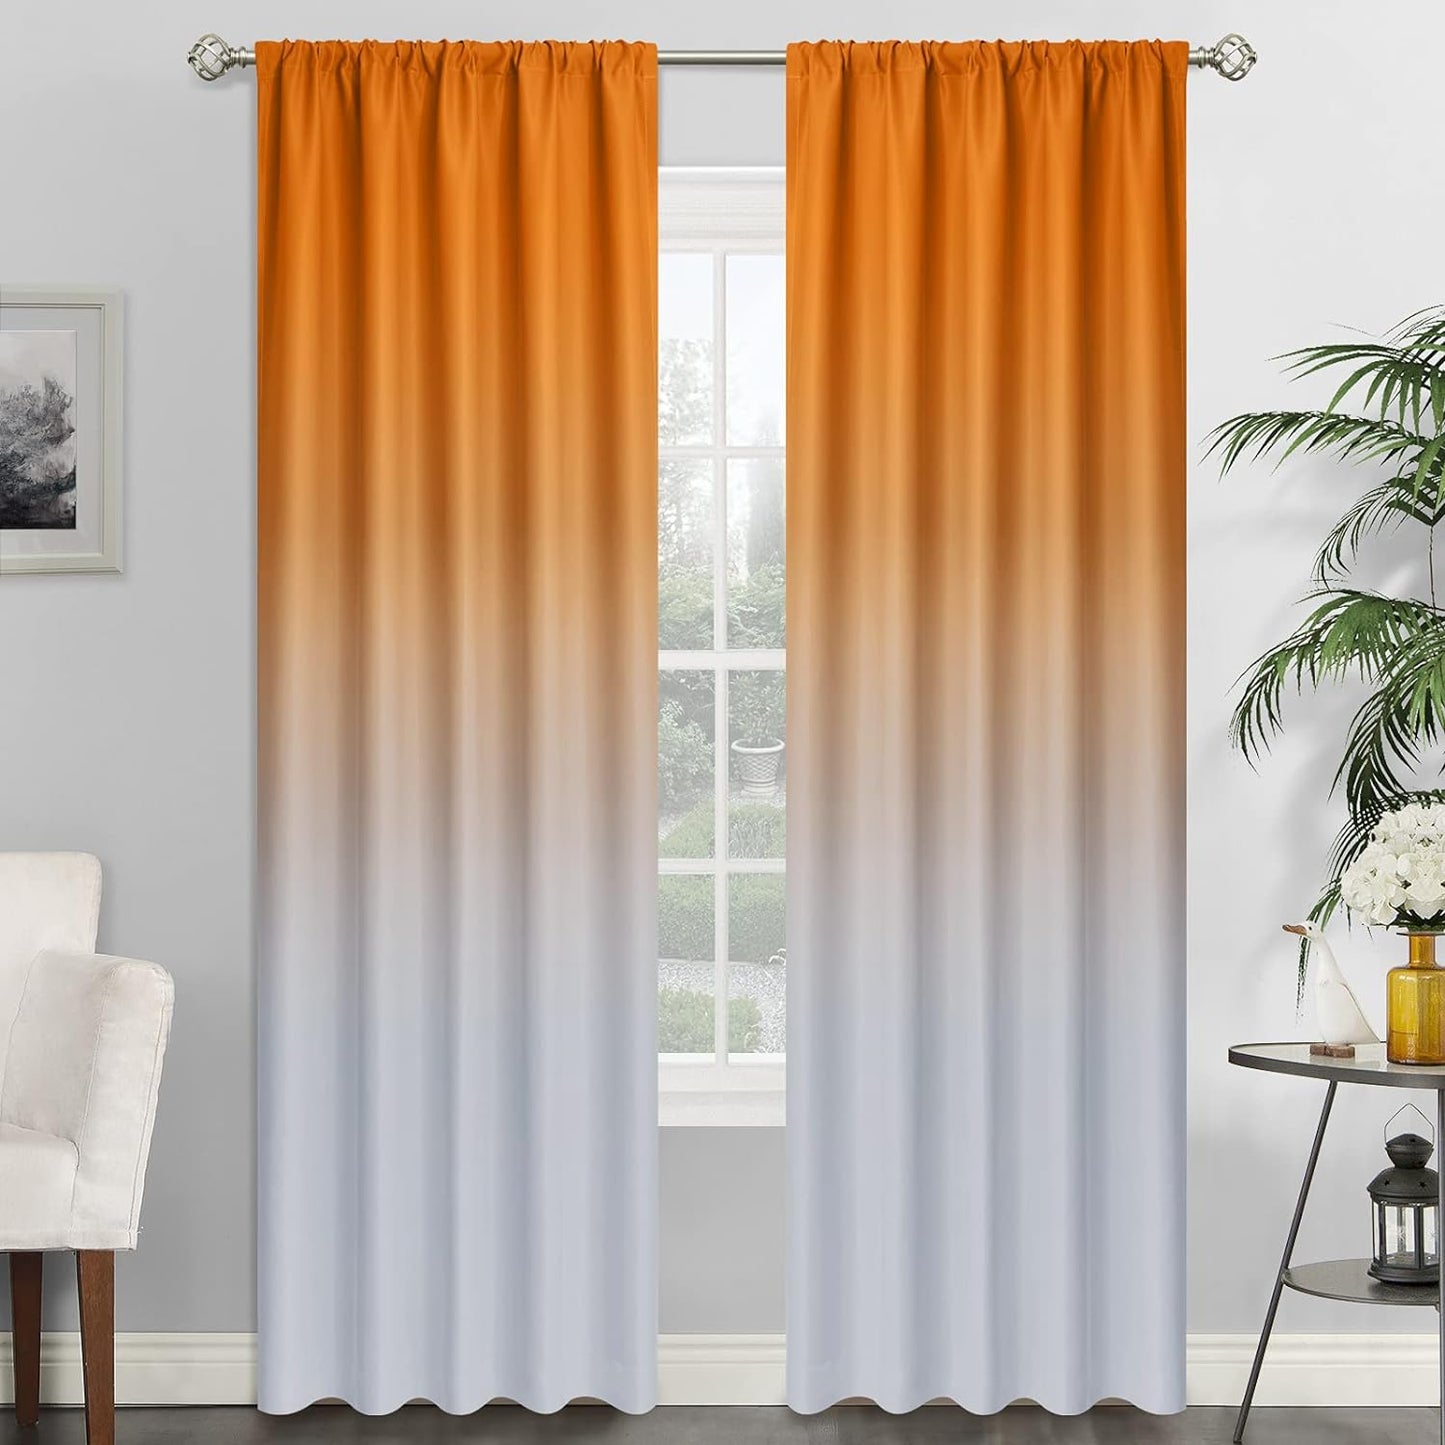 Simplehome Ombre Room Darkening Curtains for Bedroom, Light Blocking Gradient Purple to Greyish White Thermal Insulated Rod Pocket Window Curtains Drapes for Living Room,2 Panels, 52X84 Inches Length  SimpleHome Orange 1 52W X 84L / 2 Panels 